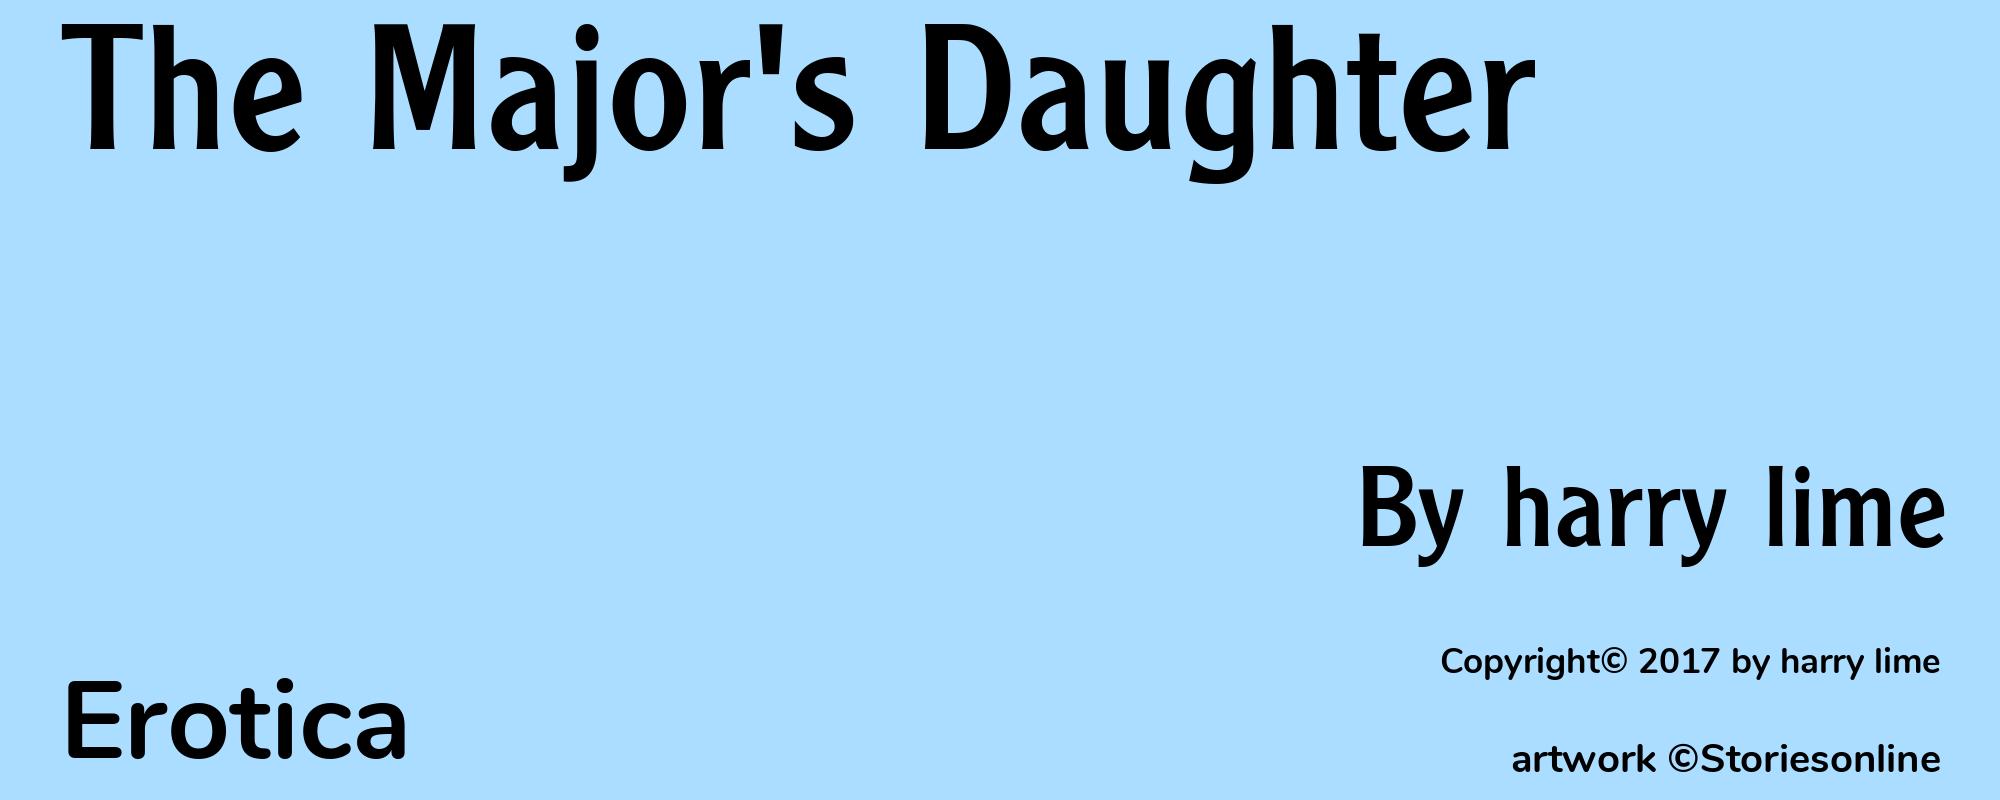 The Major's Daughter - Cover